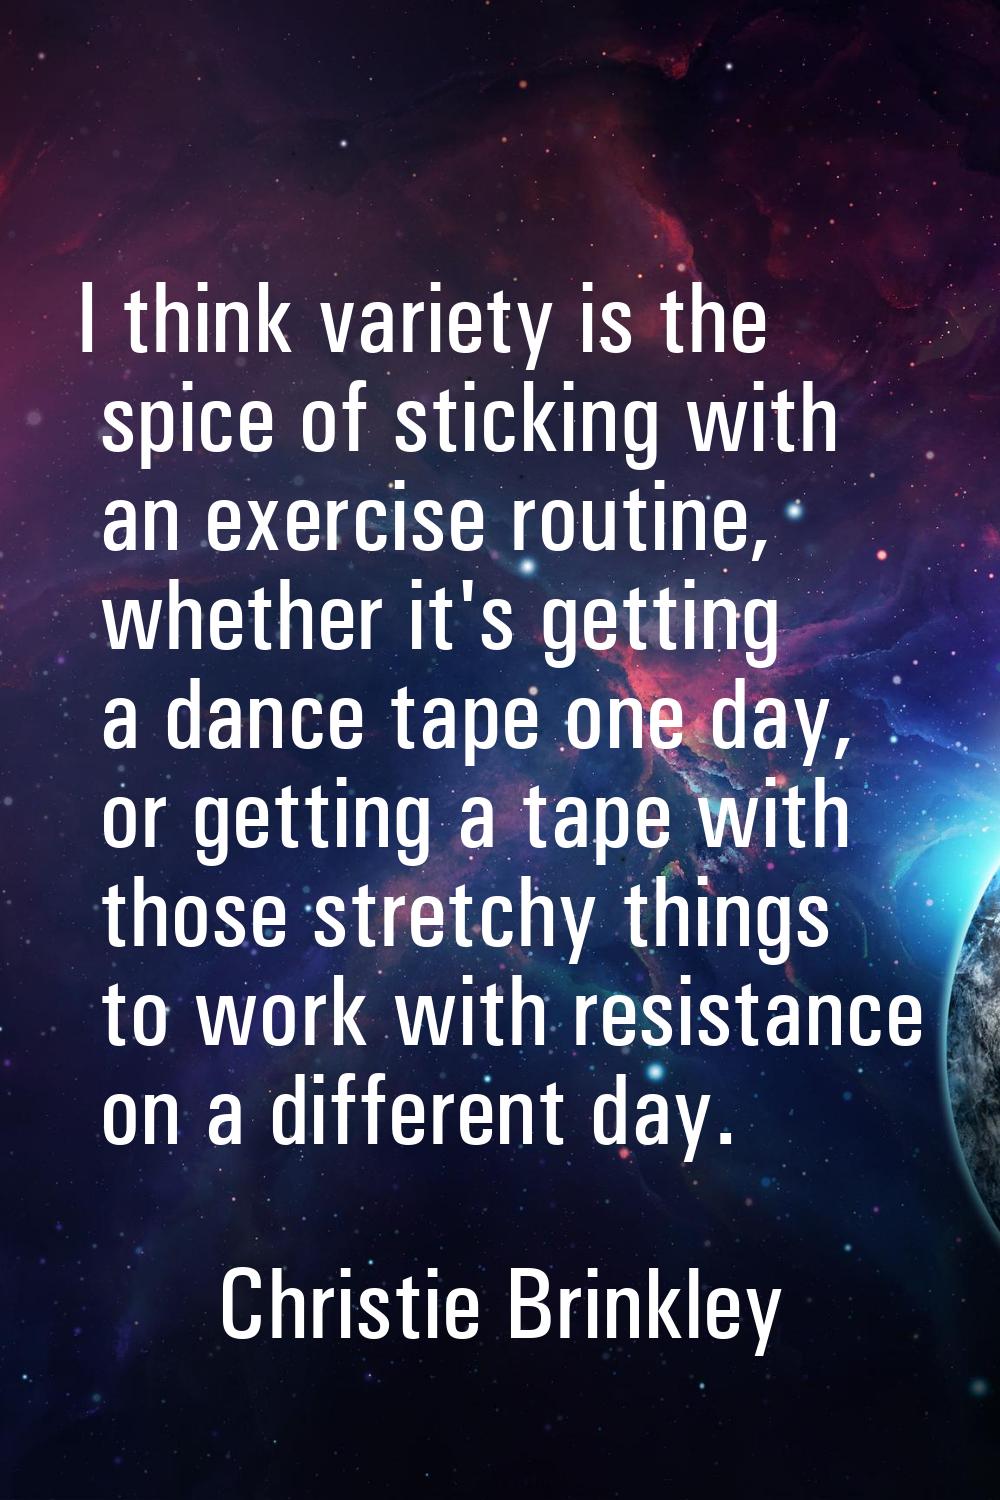 I think variety is the spice of sticking with an exercise routine, whether it's getting a dance tap